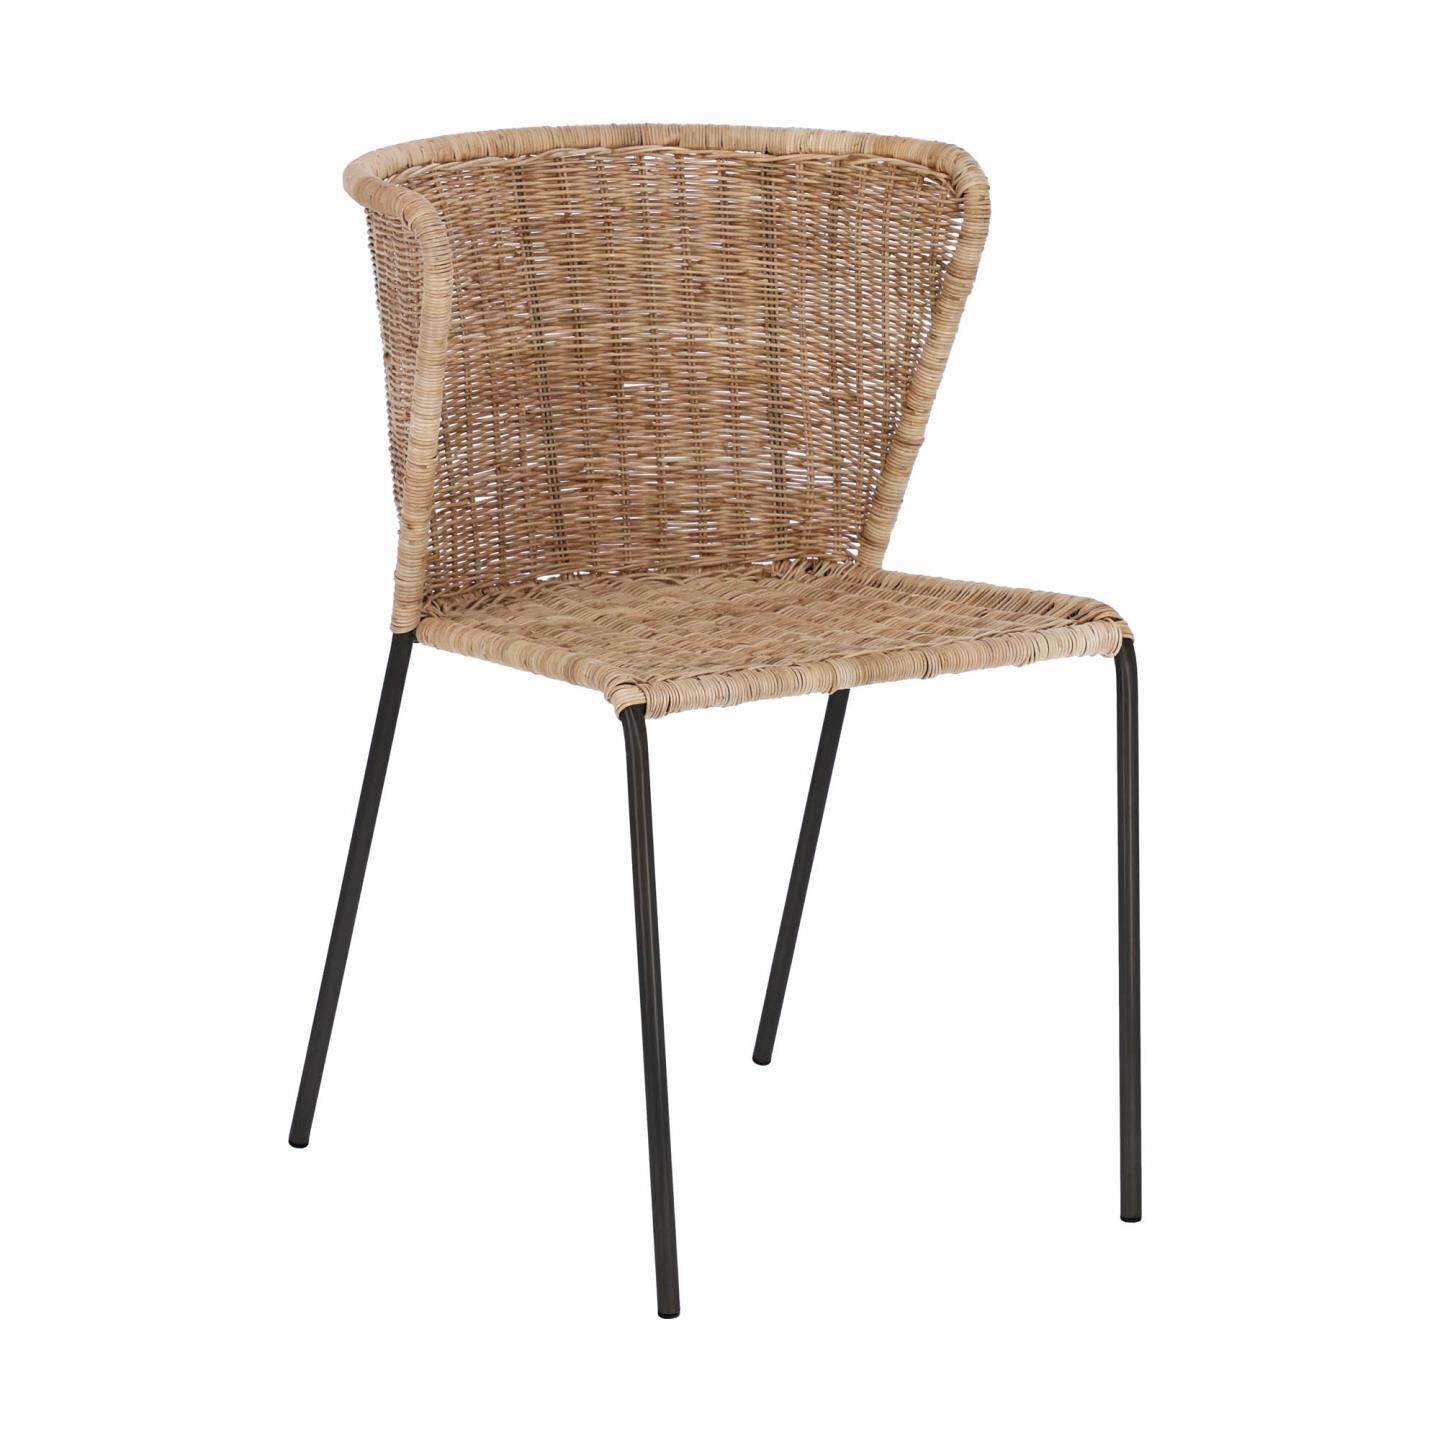 Kave Home Fantine chair